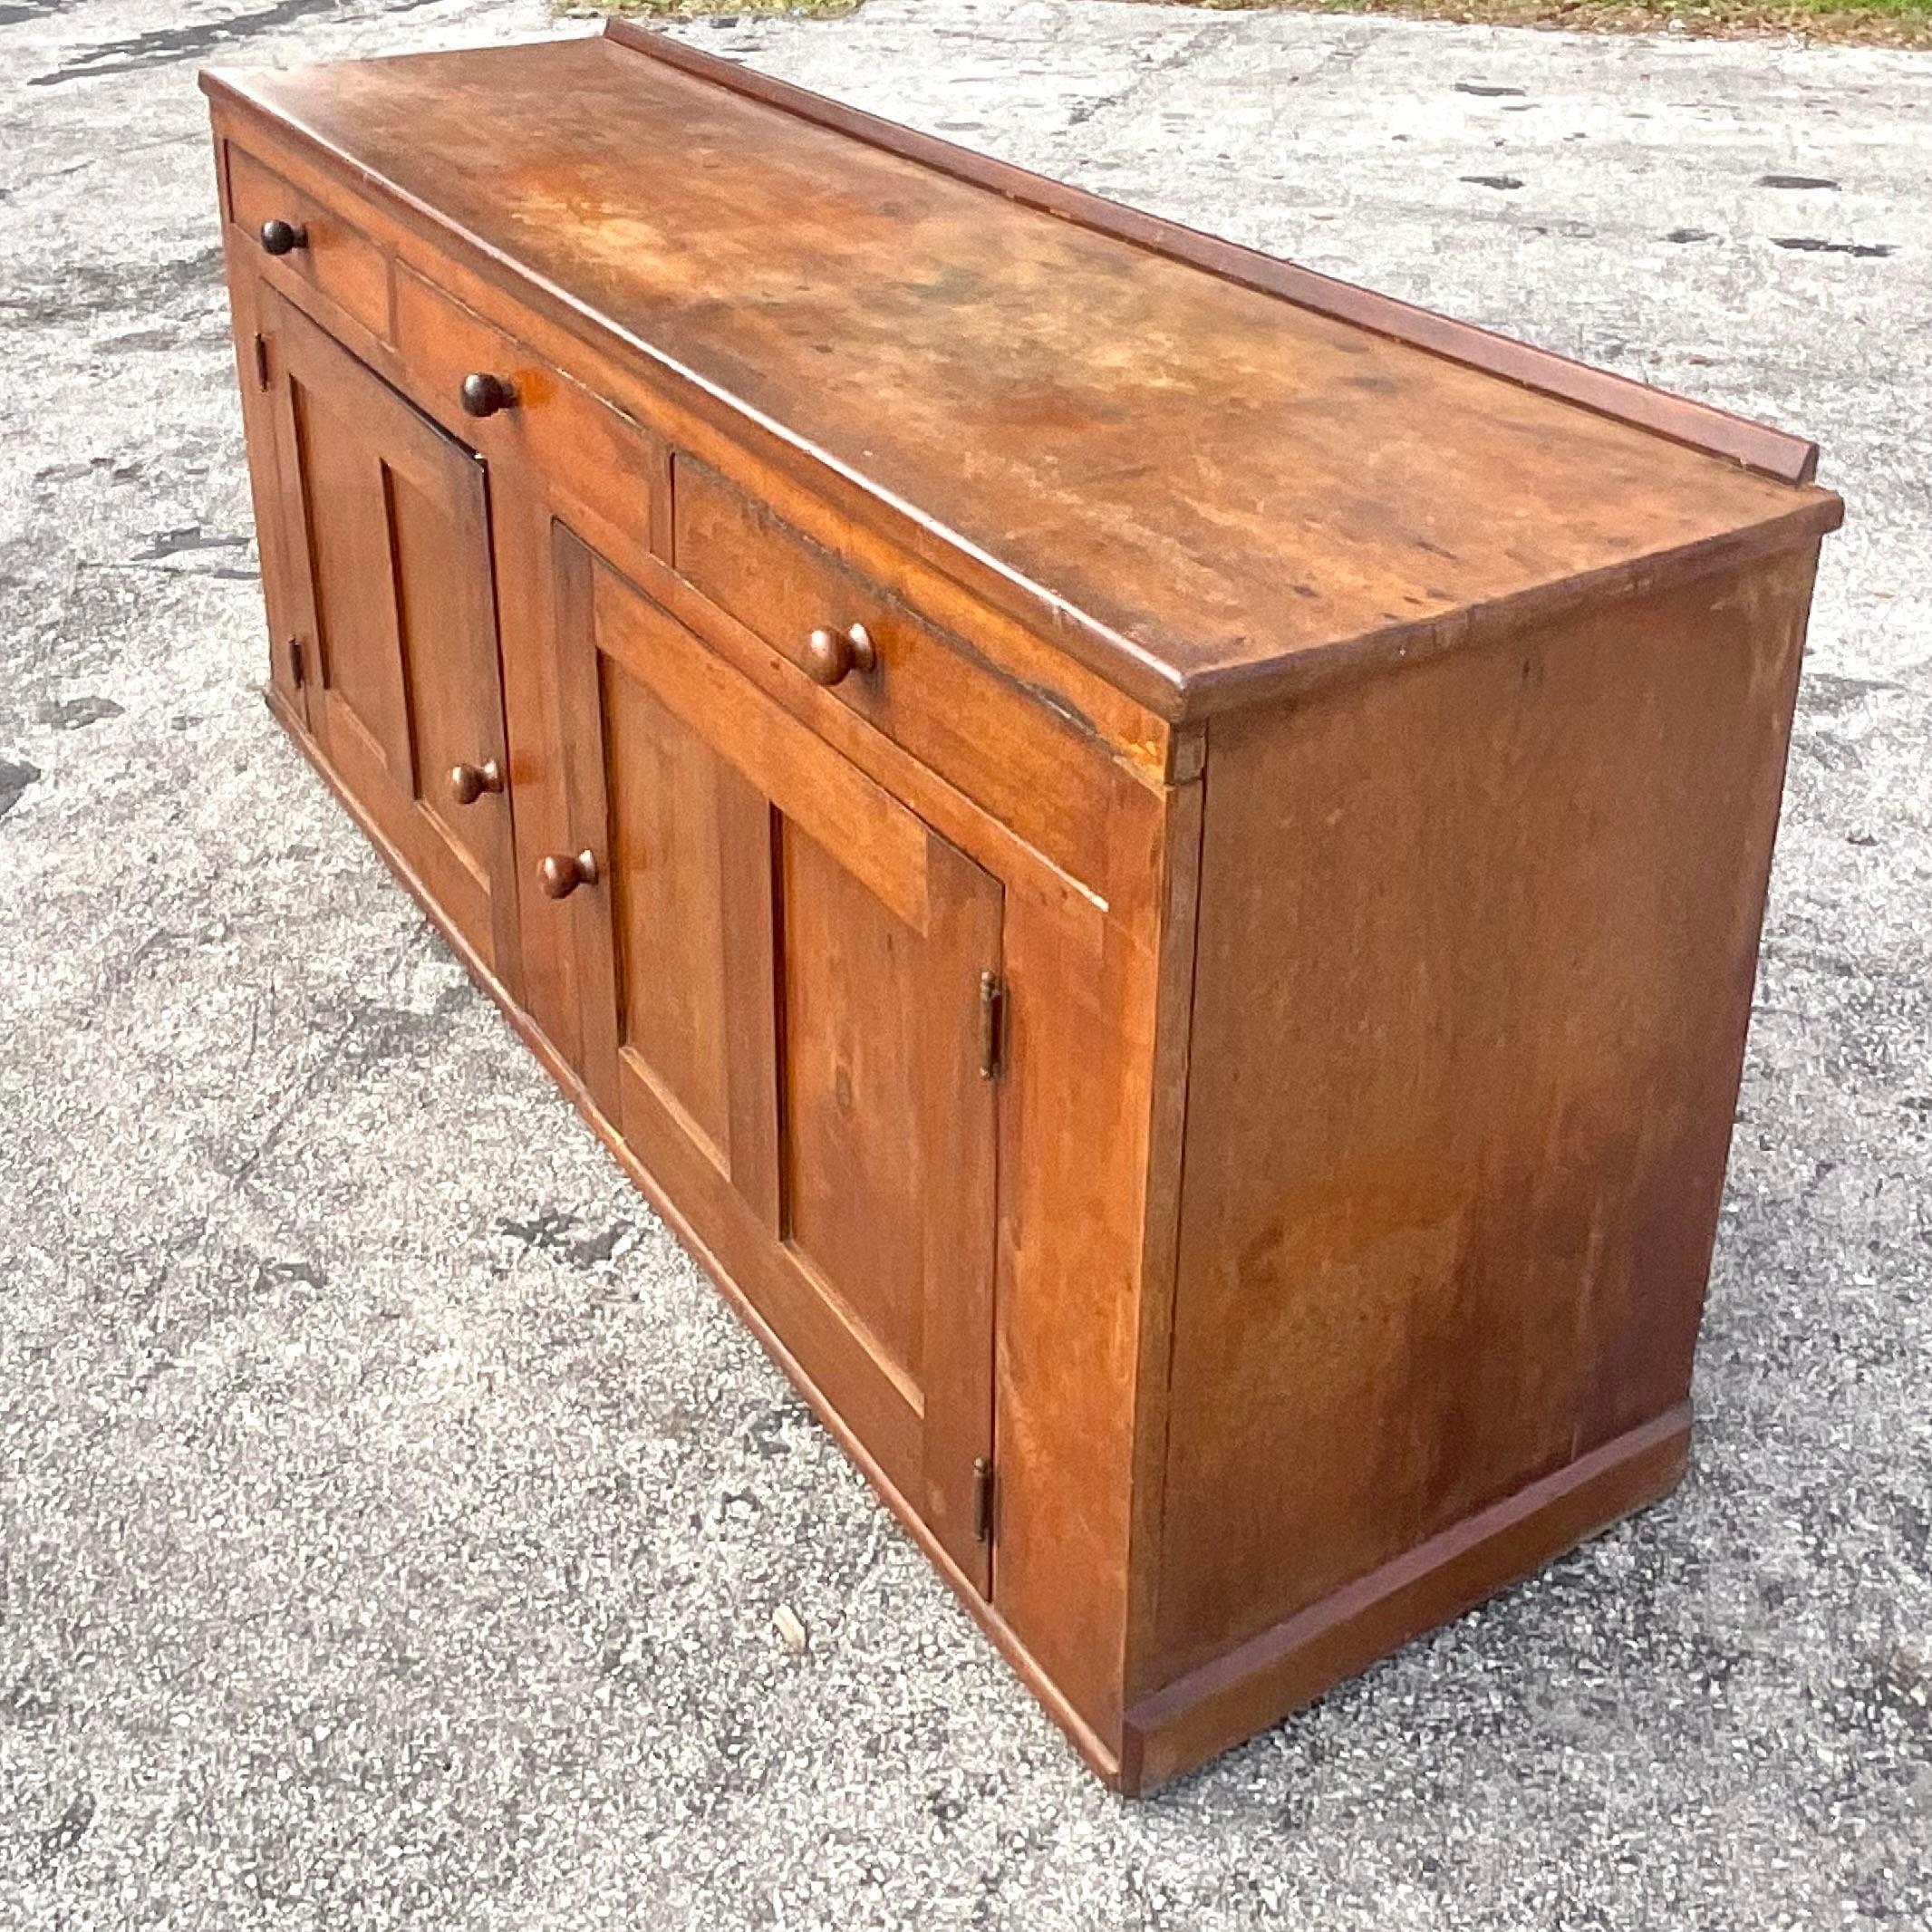 A striking vintage Coastal Primitive credenza. A classic credenza design with an incredible patina from time. Lots of great storage below. Acquired from a Palm Beach estate.